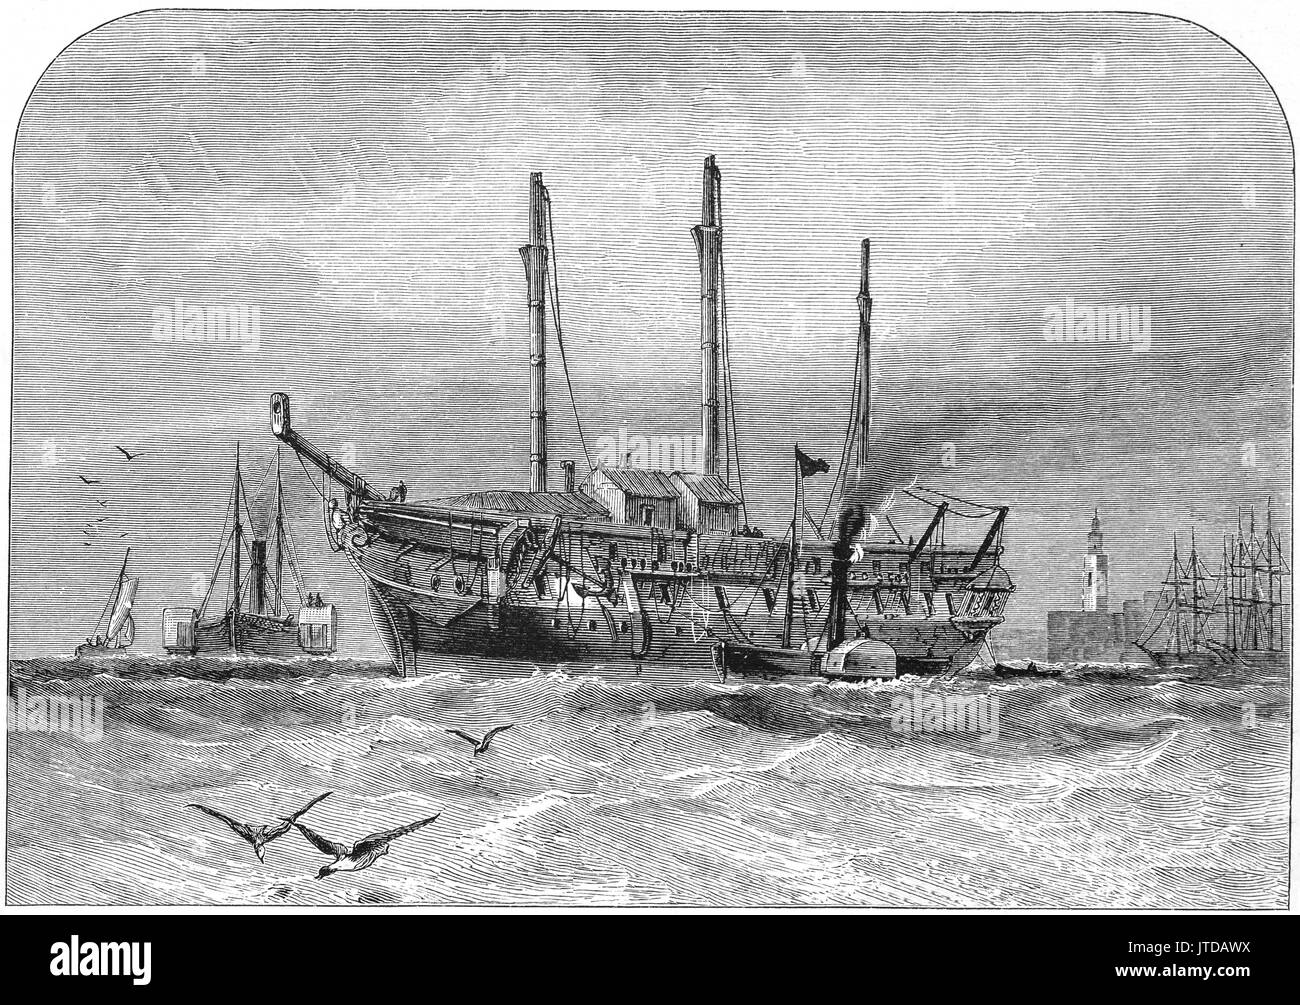 1870: Paddle Steamers around the wrecked hull of an old sailing ship, the River Thames, Essex,Southern England Stock Photo